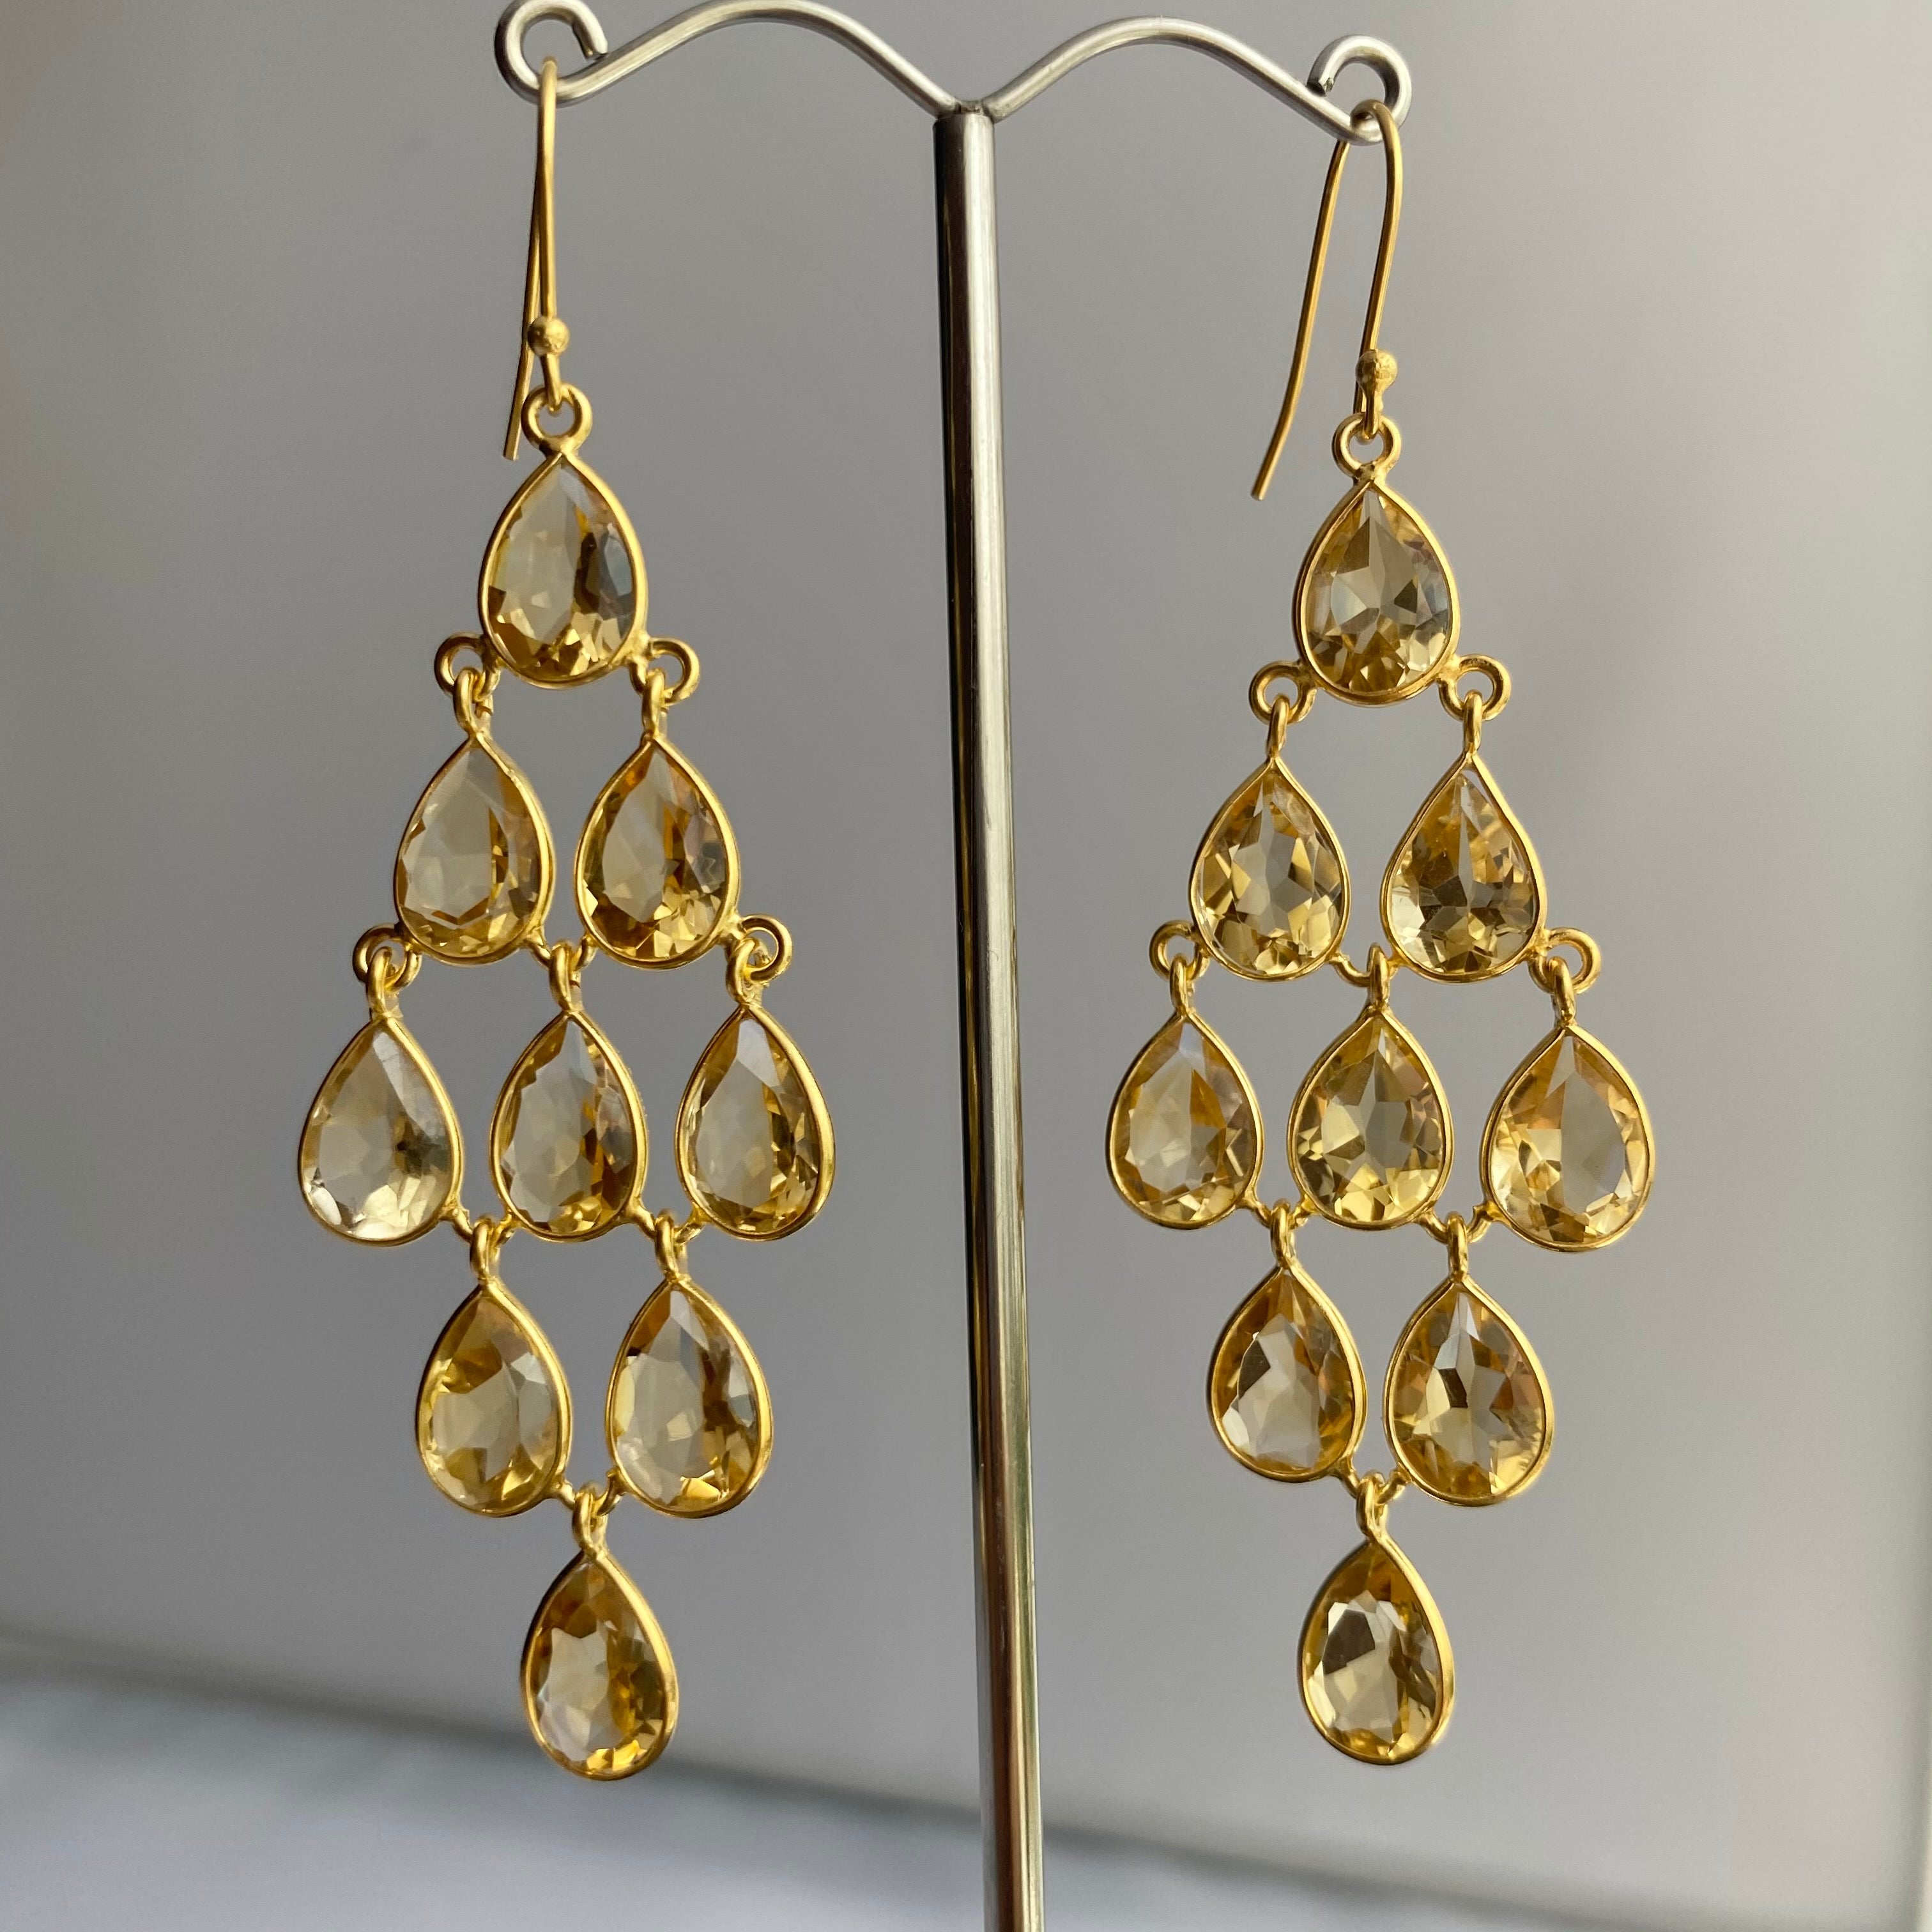 Gold Plated Sterling Silver Chandelier Earrings with Natural Gemstones - Citrine